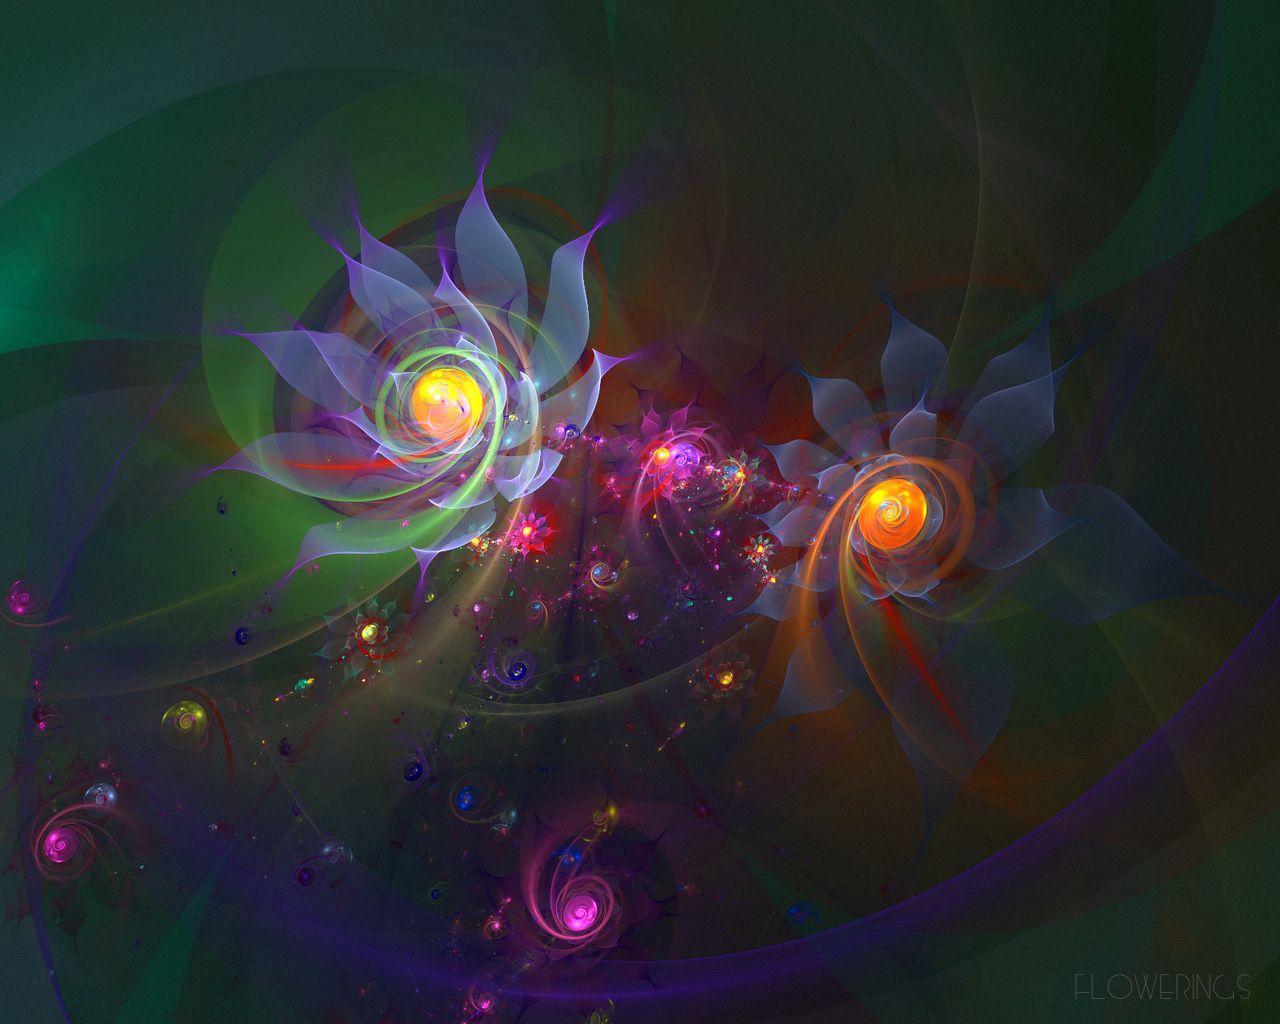 Cool HD Wallpaper fractal, abstract, lines, flowers